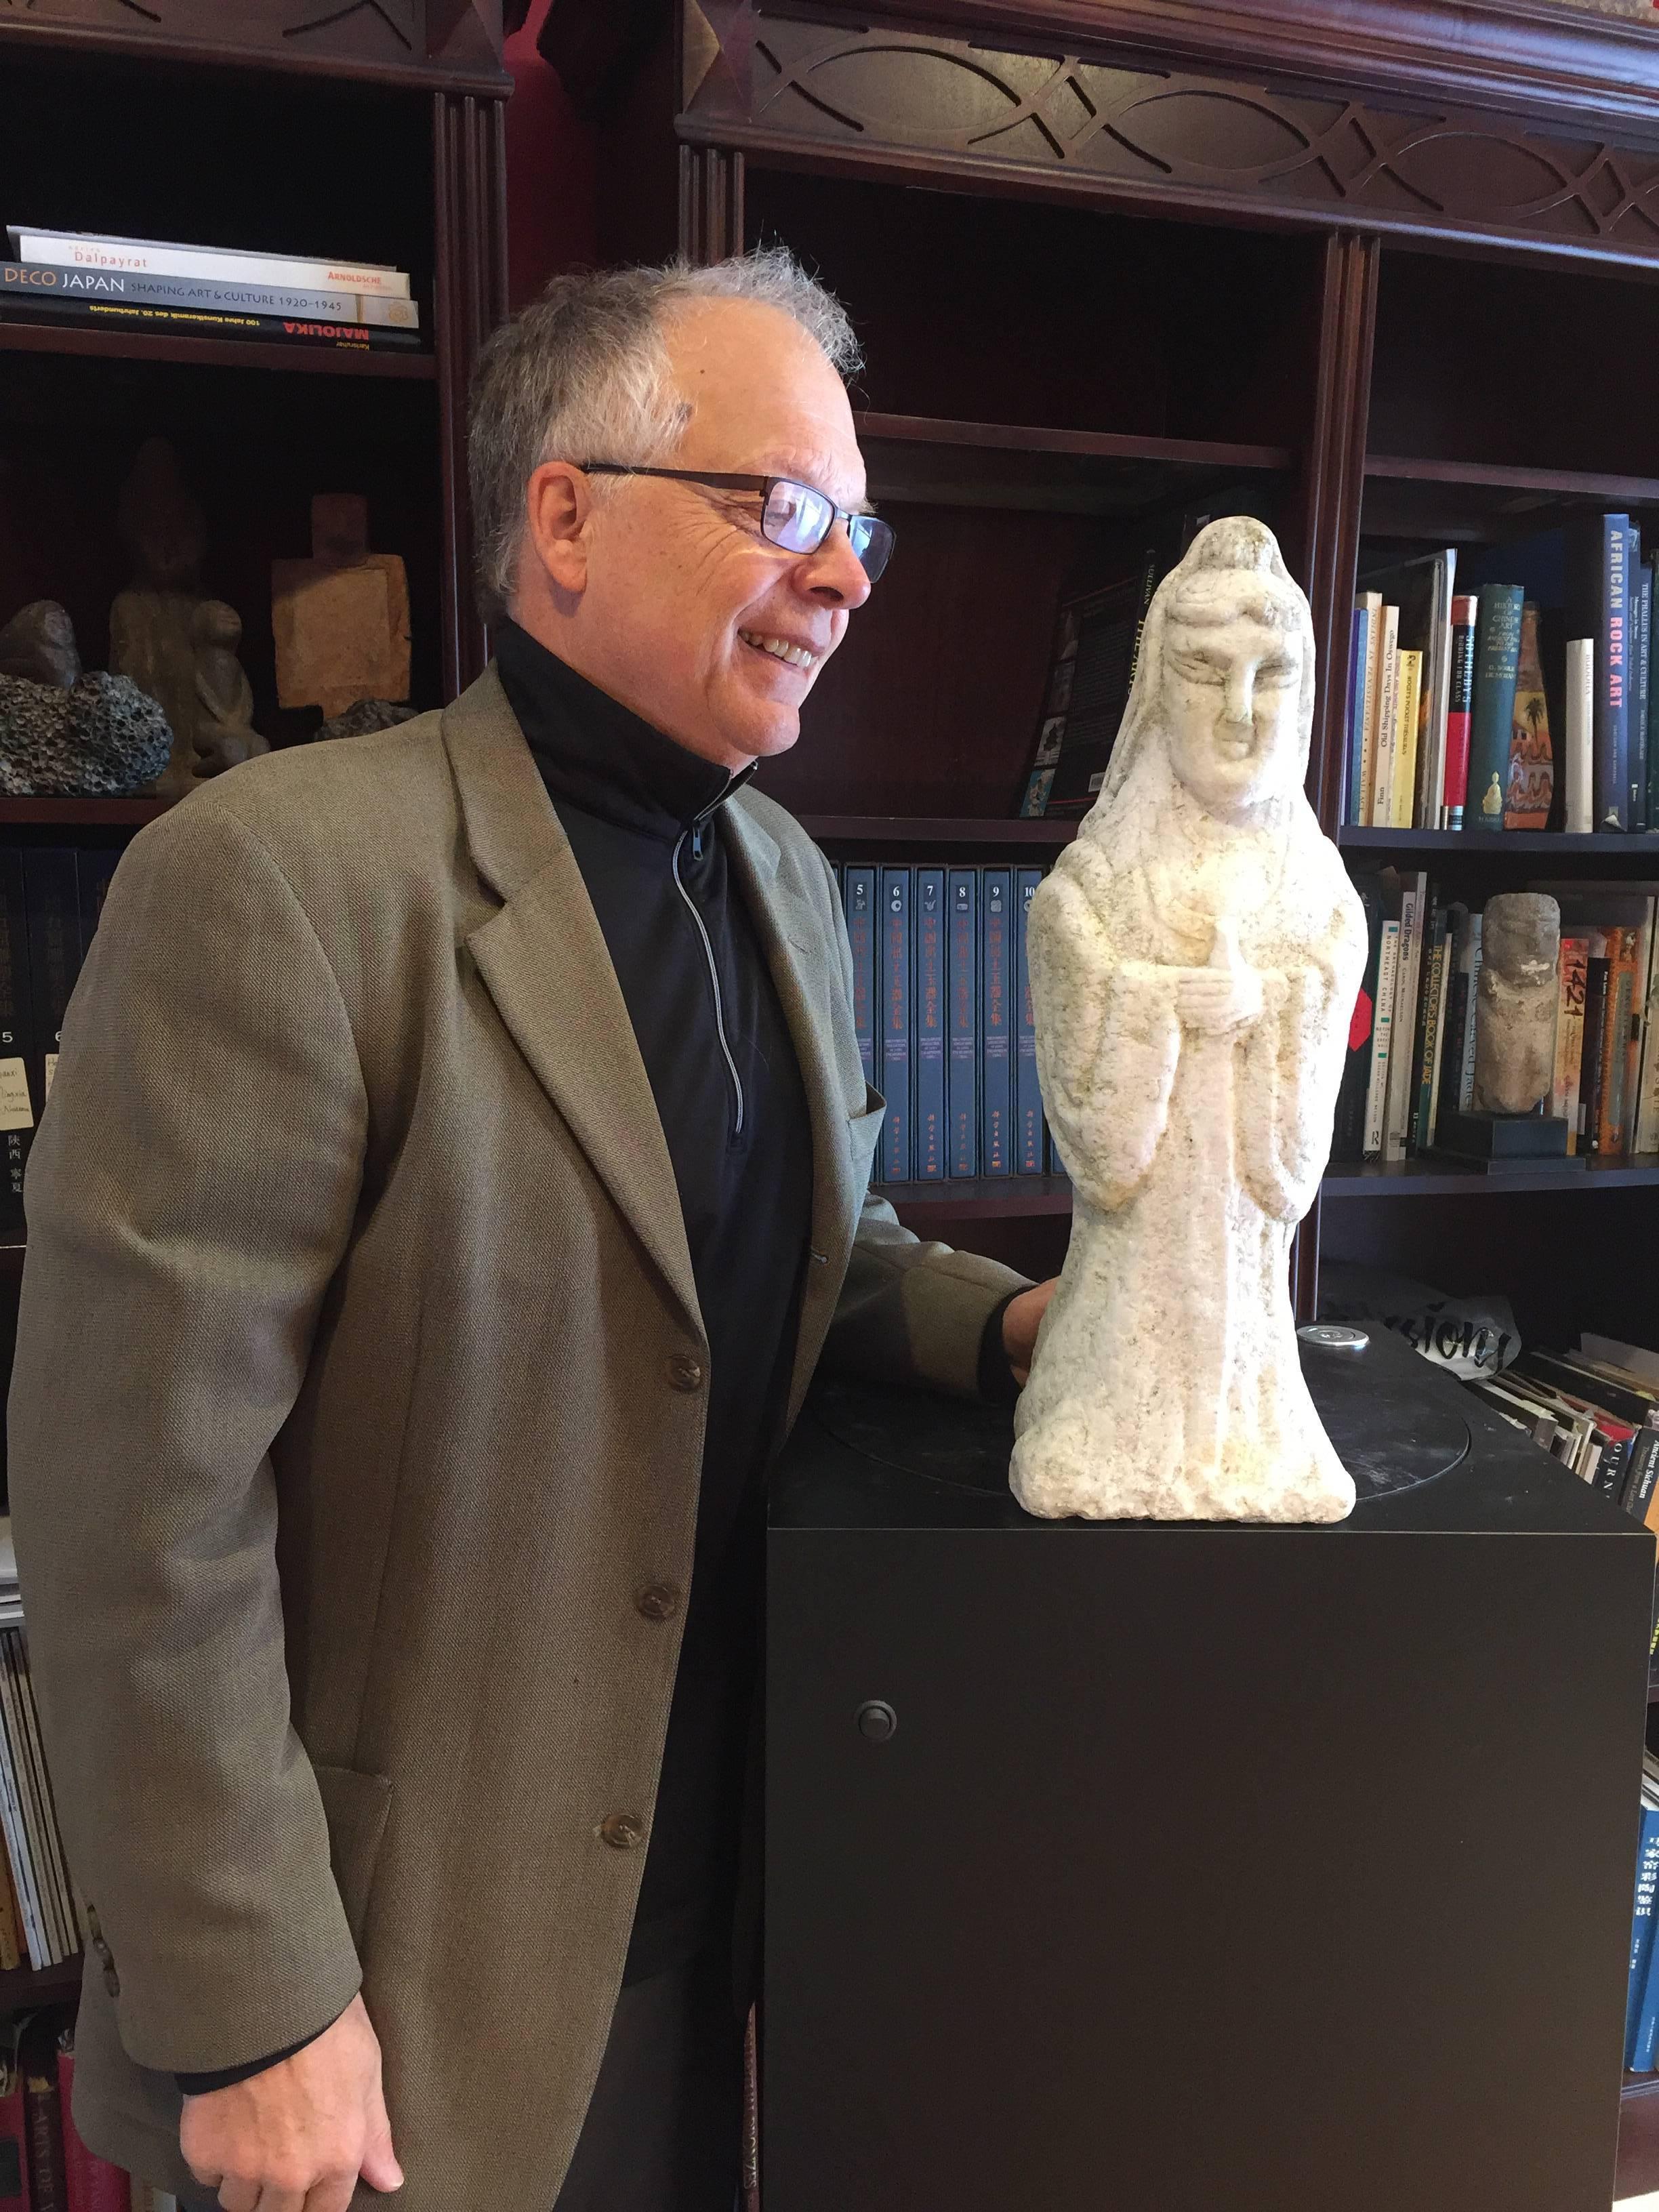 A good opportunity to acquire a tall and handsome effigy of a Chinese  hand-carved marble Guan yin , Buddha's attendant. 

Coming from our private collection, it would look superb in your favorite space indoor or out of doors. Portable substantial